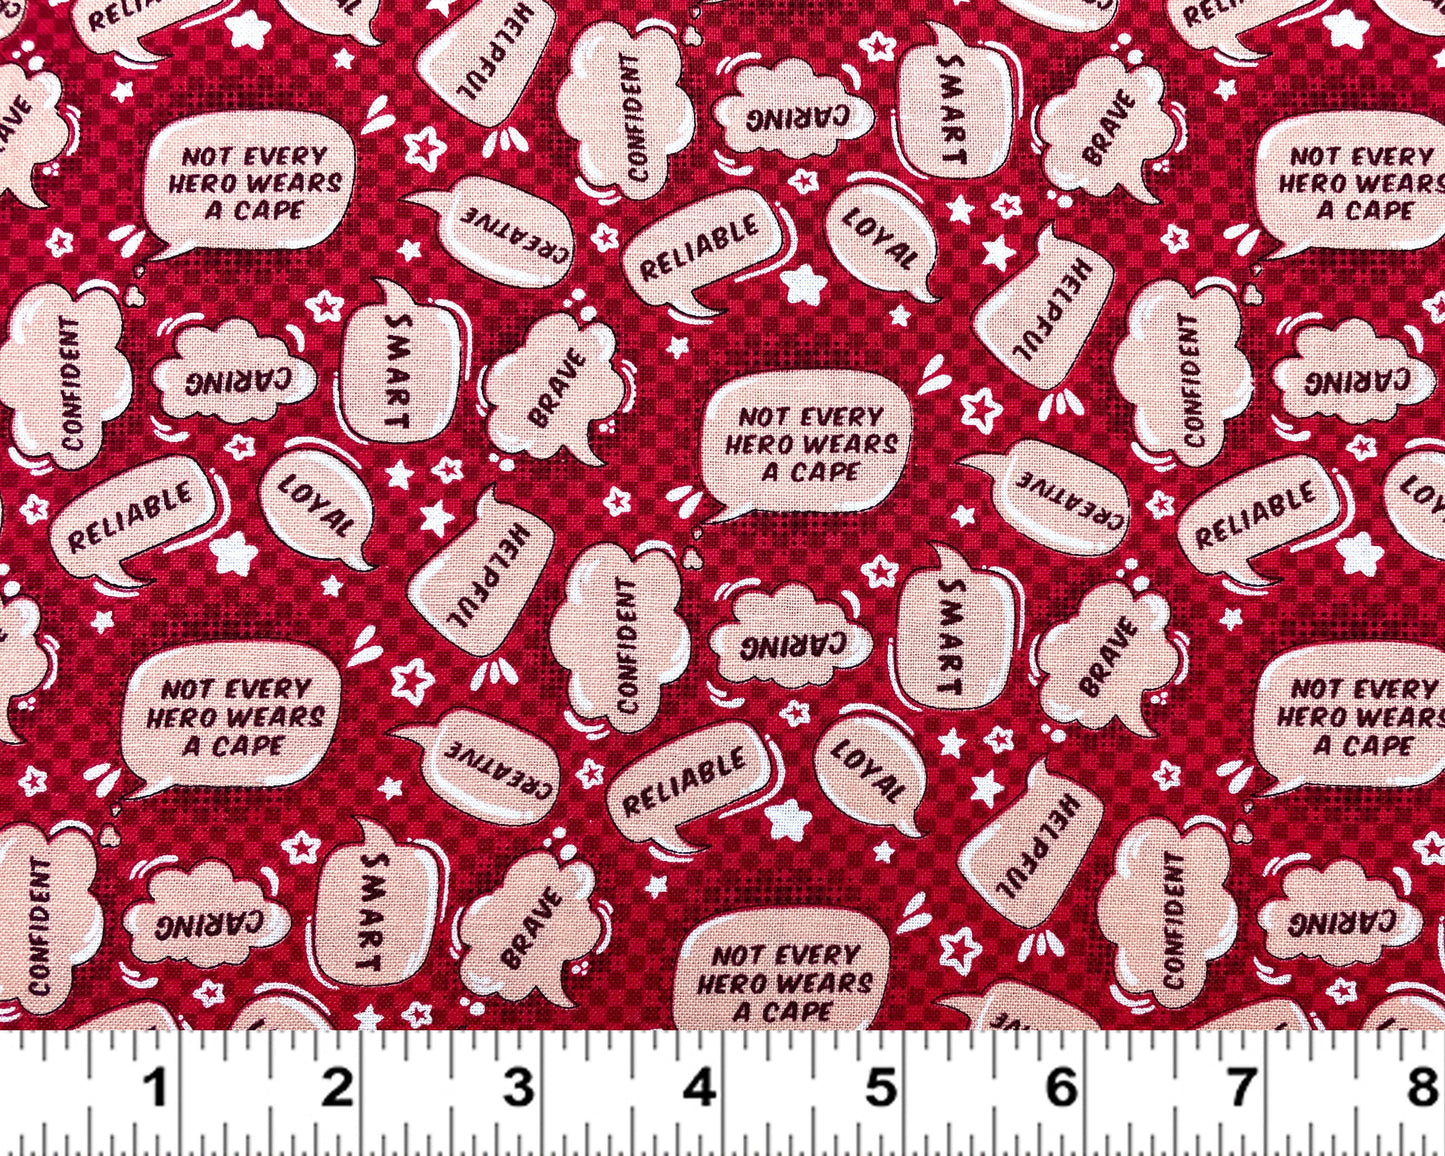 Hero Fabric - Thought Bubbles - Gnome Town Heroes collection - Henry Glass - first responder fabric - 100% Cotton Fabric - SHIPS NEXT DAY